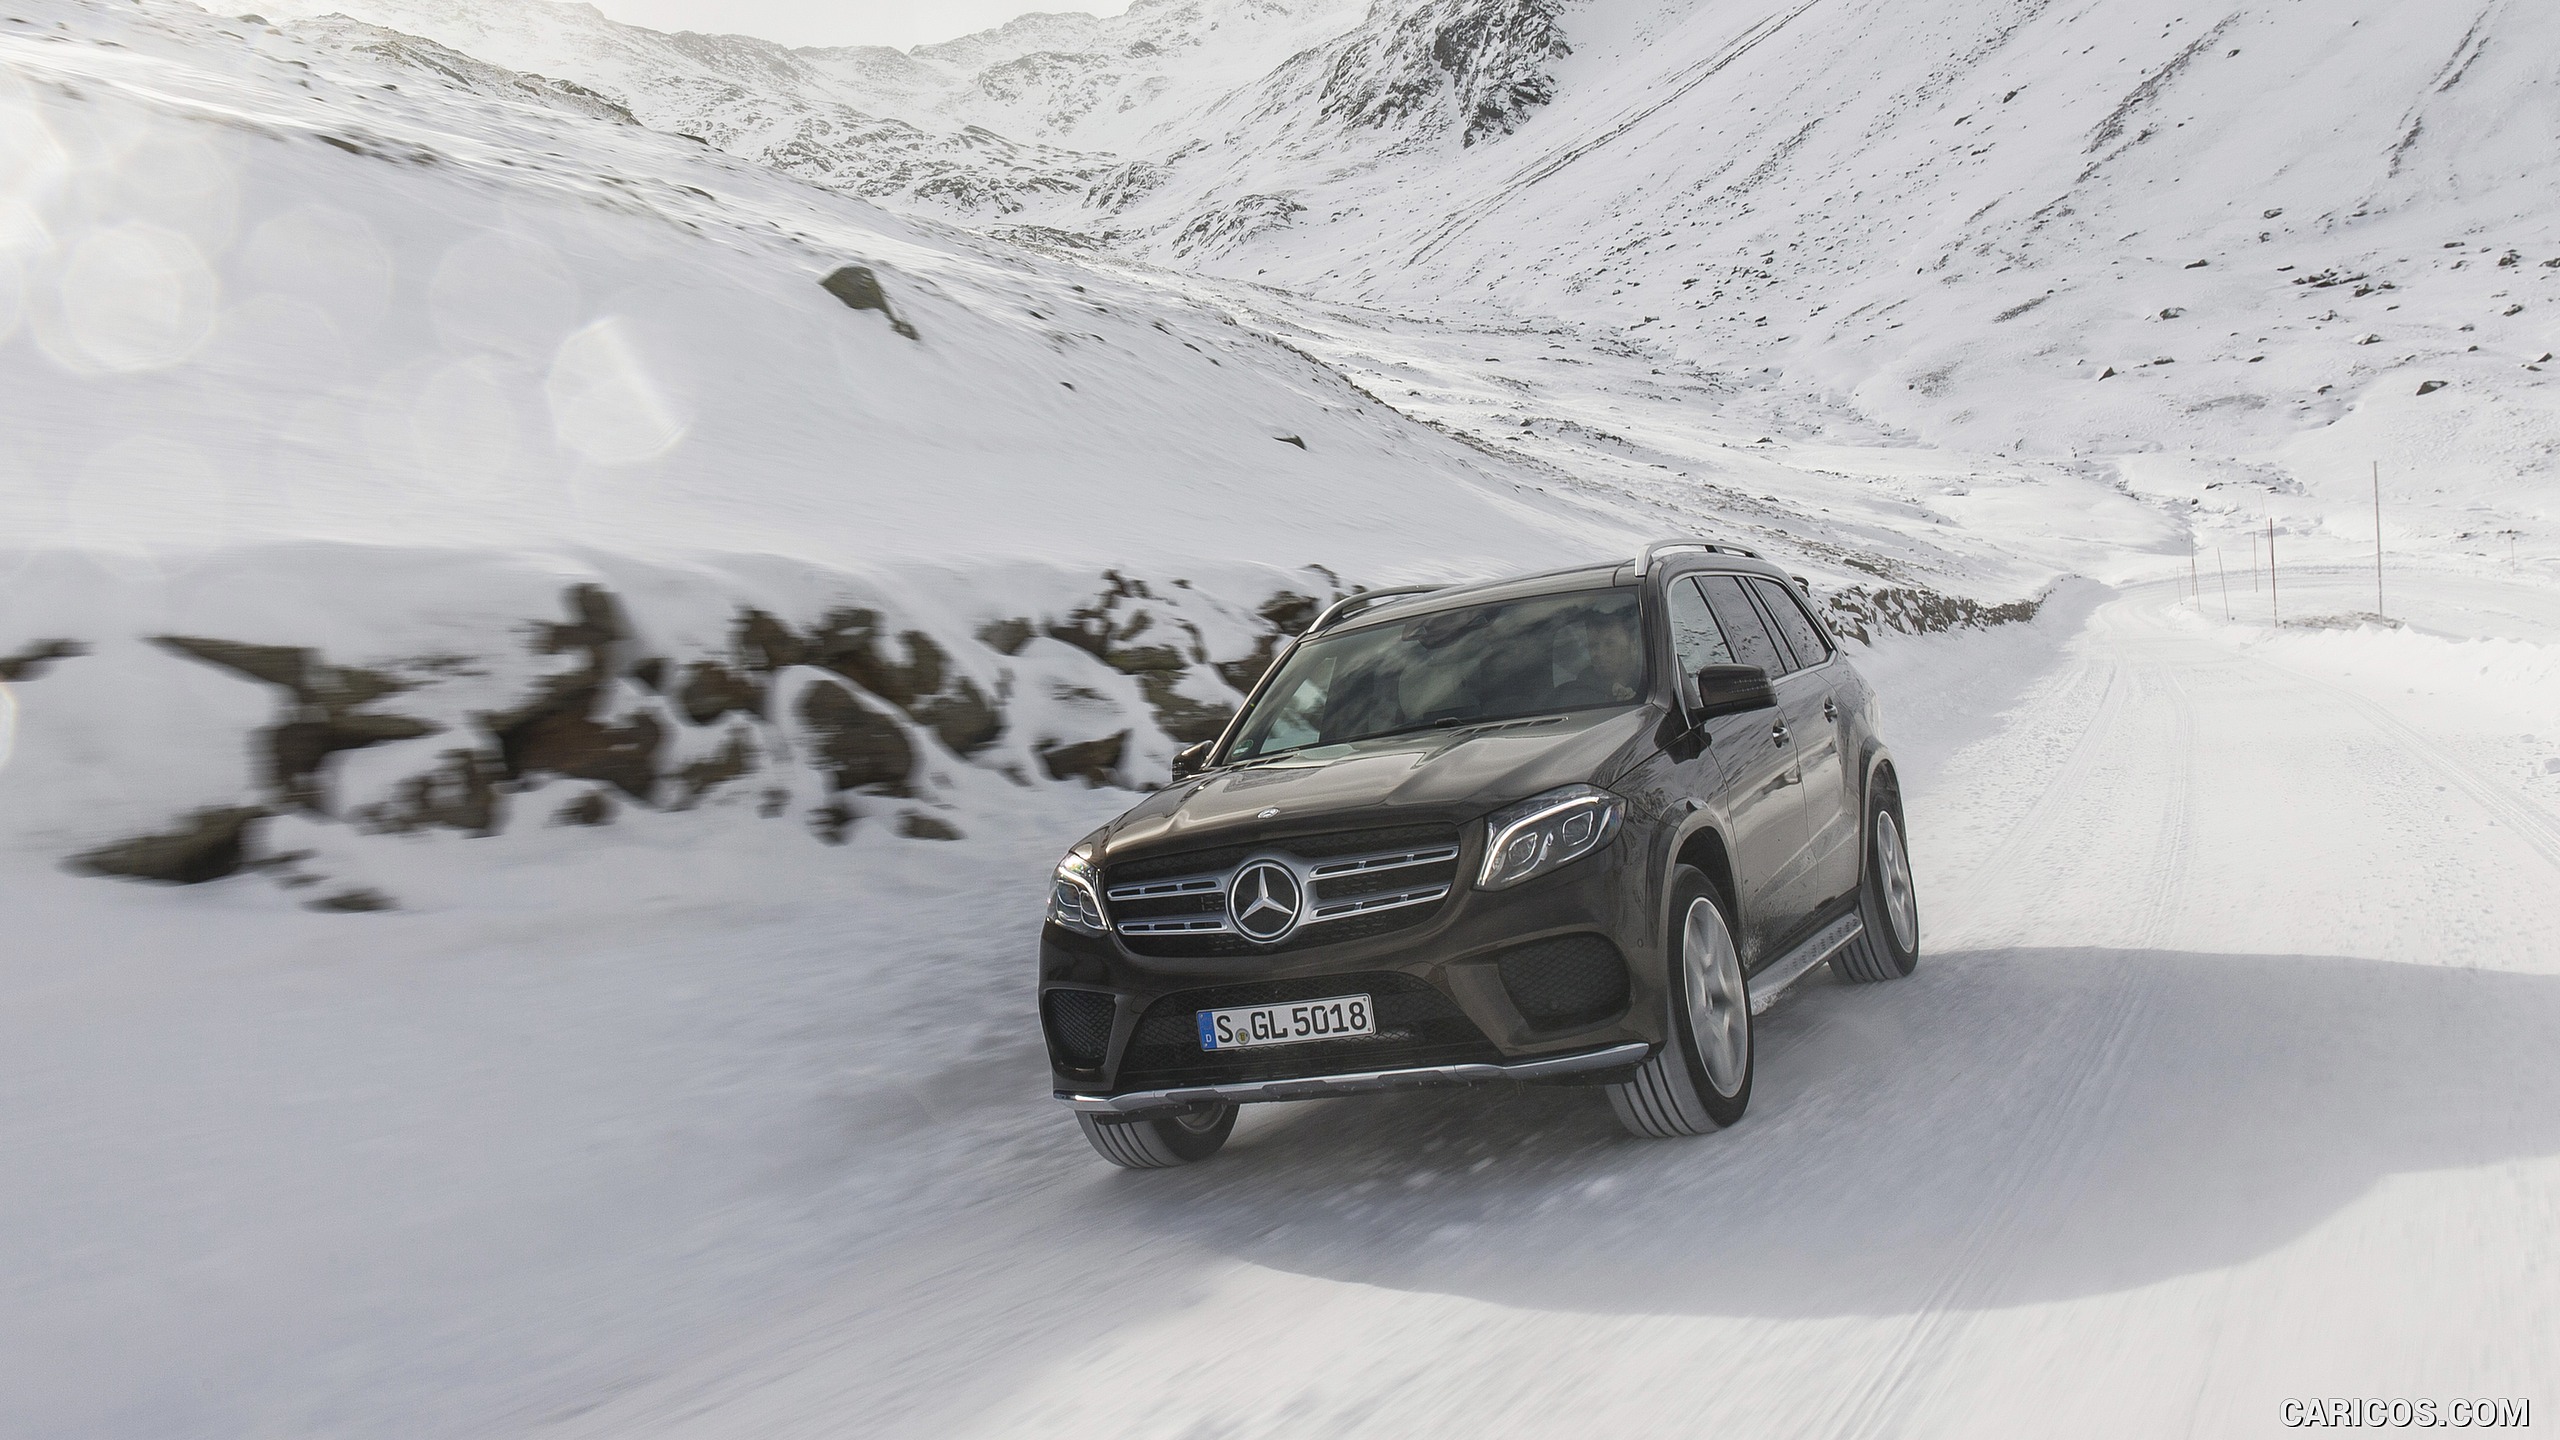 2017 Mercedes-Benz GLS 350d 4MATIC AMG Line in Snow - Front, #185 of 255